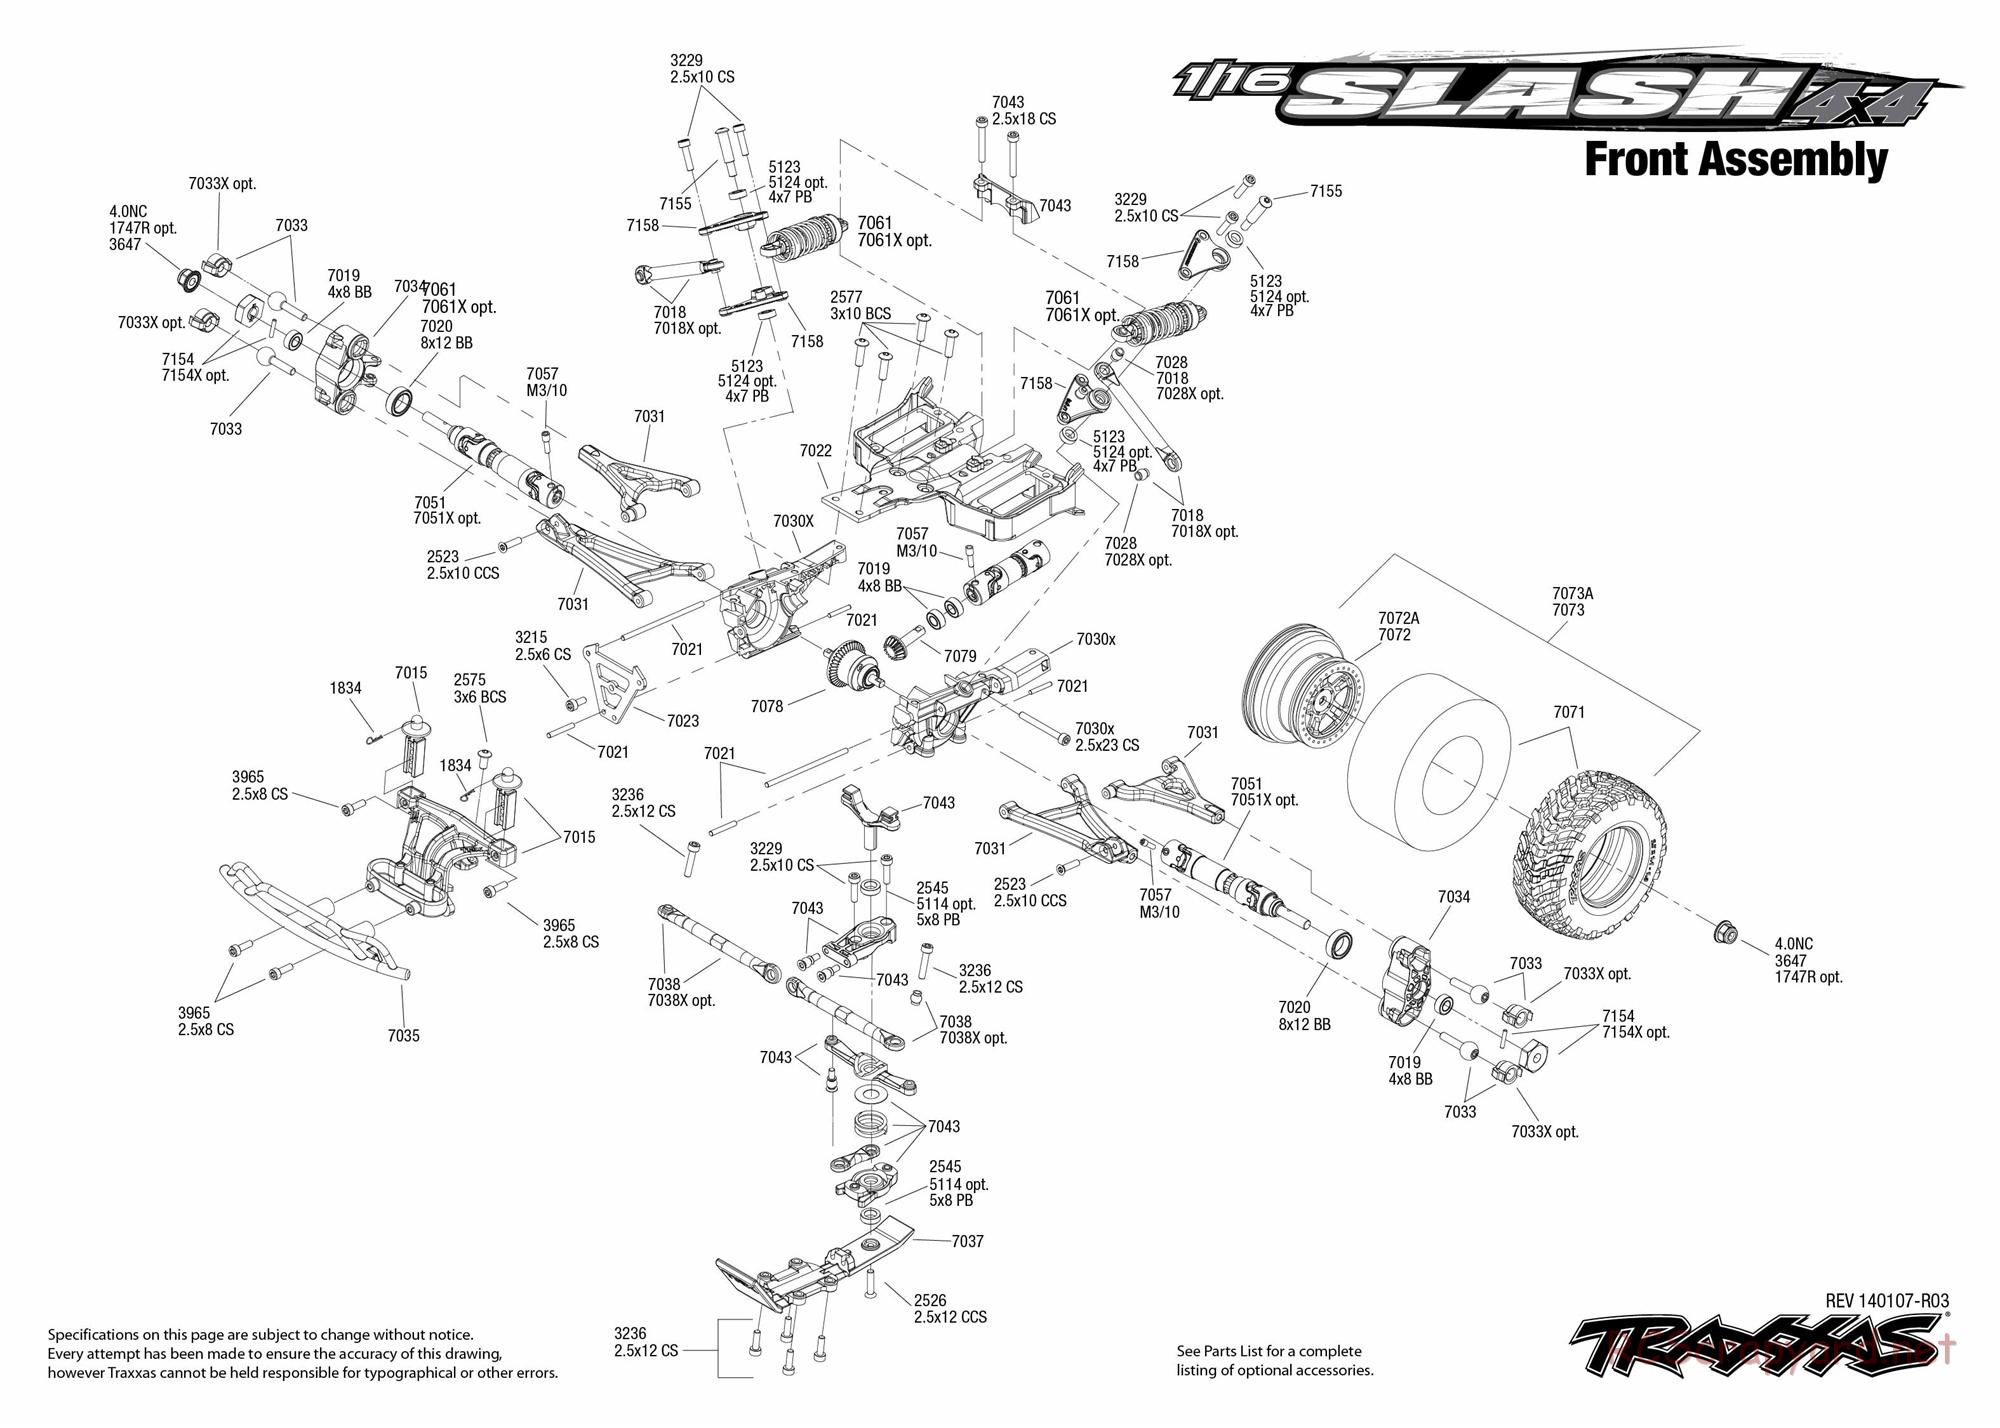 Traxxas - 1/16 Slash 4x4 Brushed (2013) - Exploded Views - Page 3